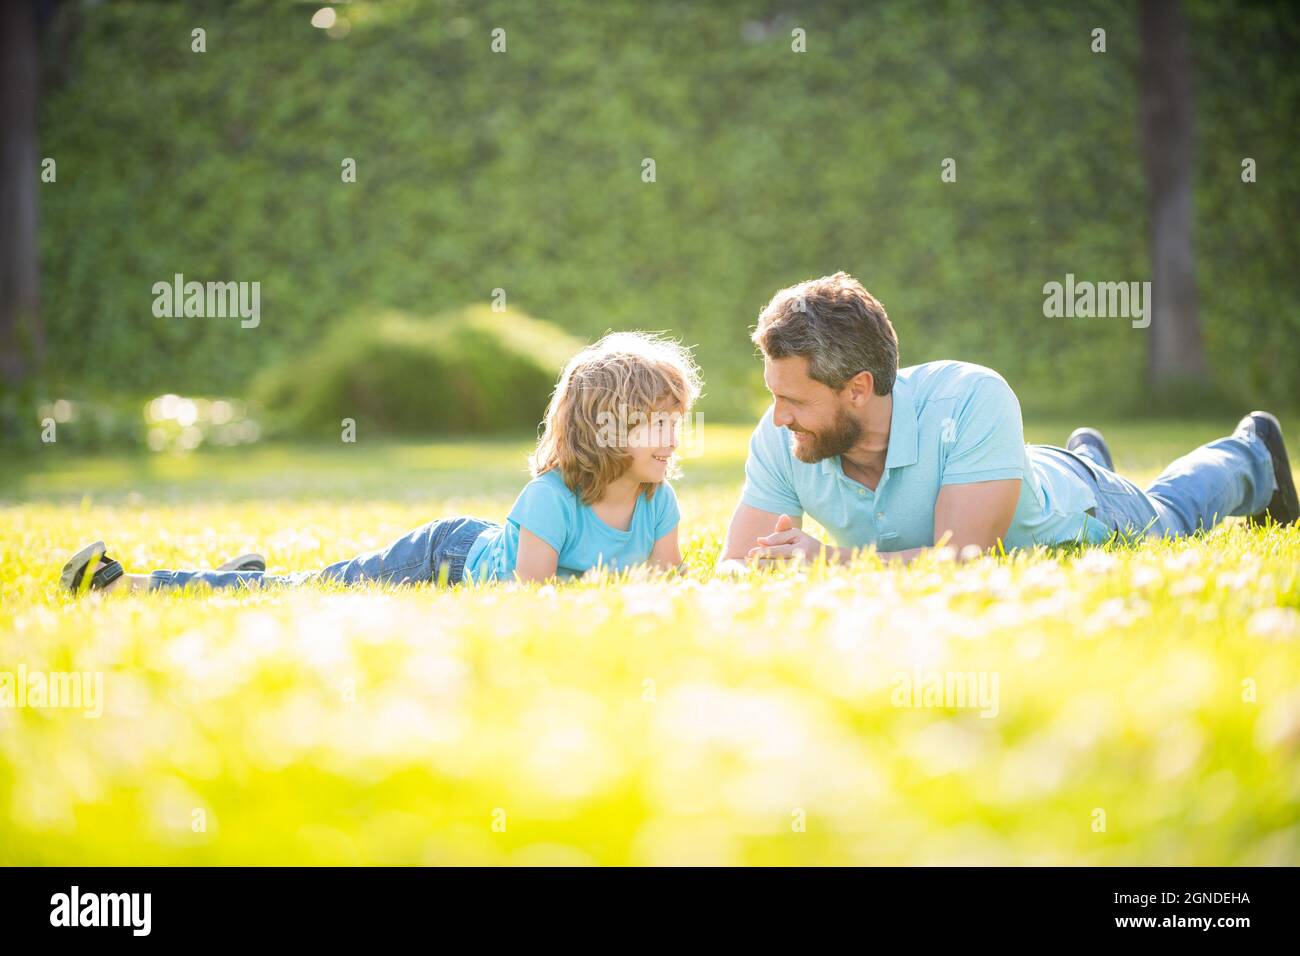 fathers day. happy father and son having fun in park. family value. childhood and parenthood. Stock Photo